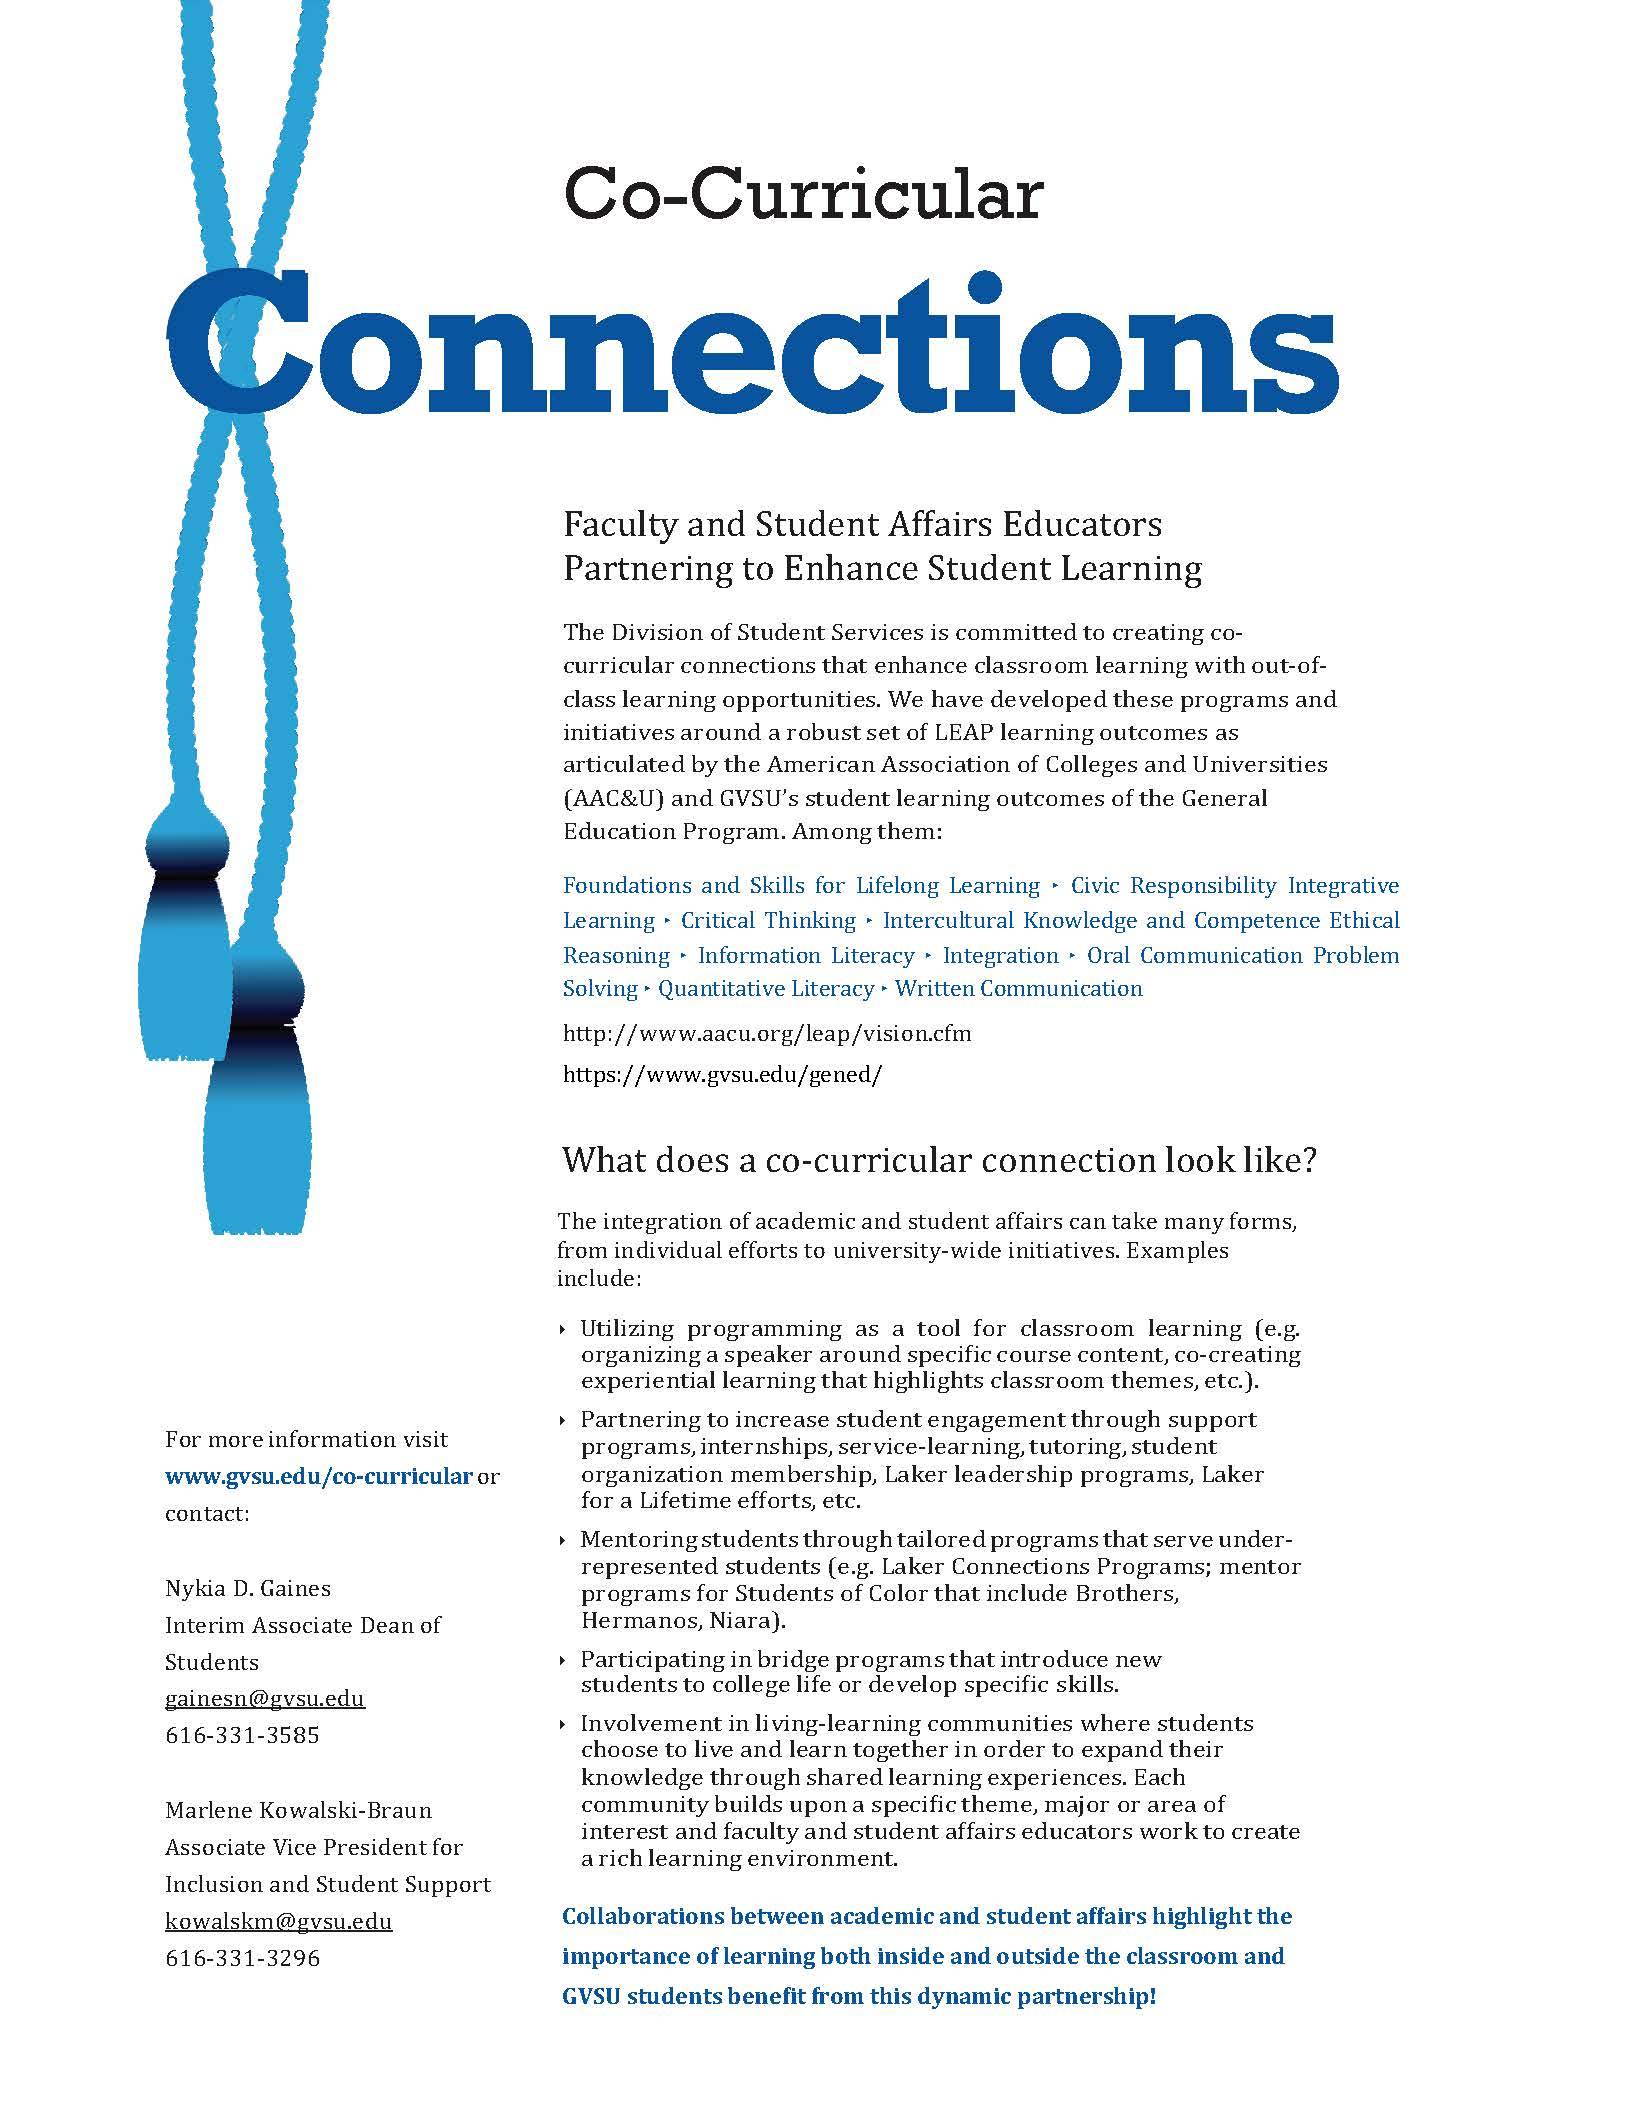 This is a downloadable PDF of the Co-Curricular connection